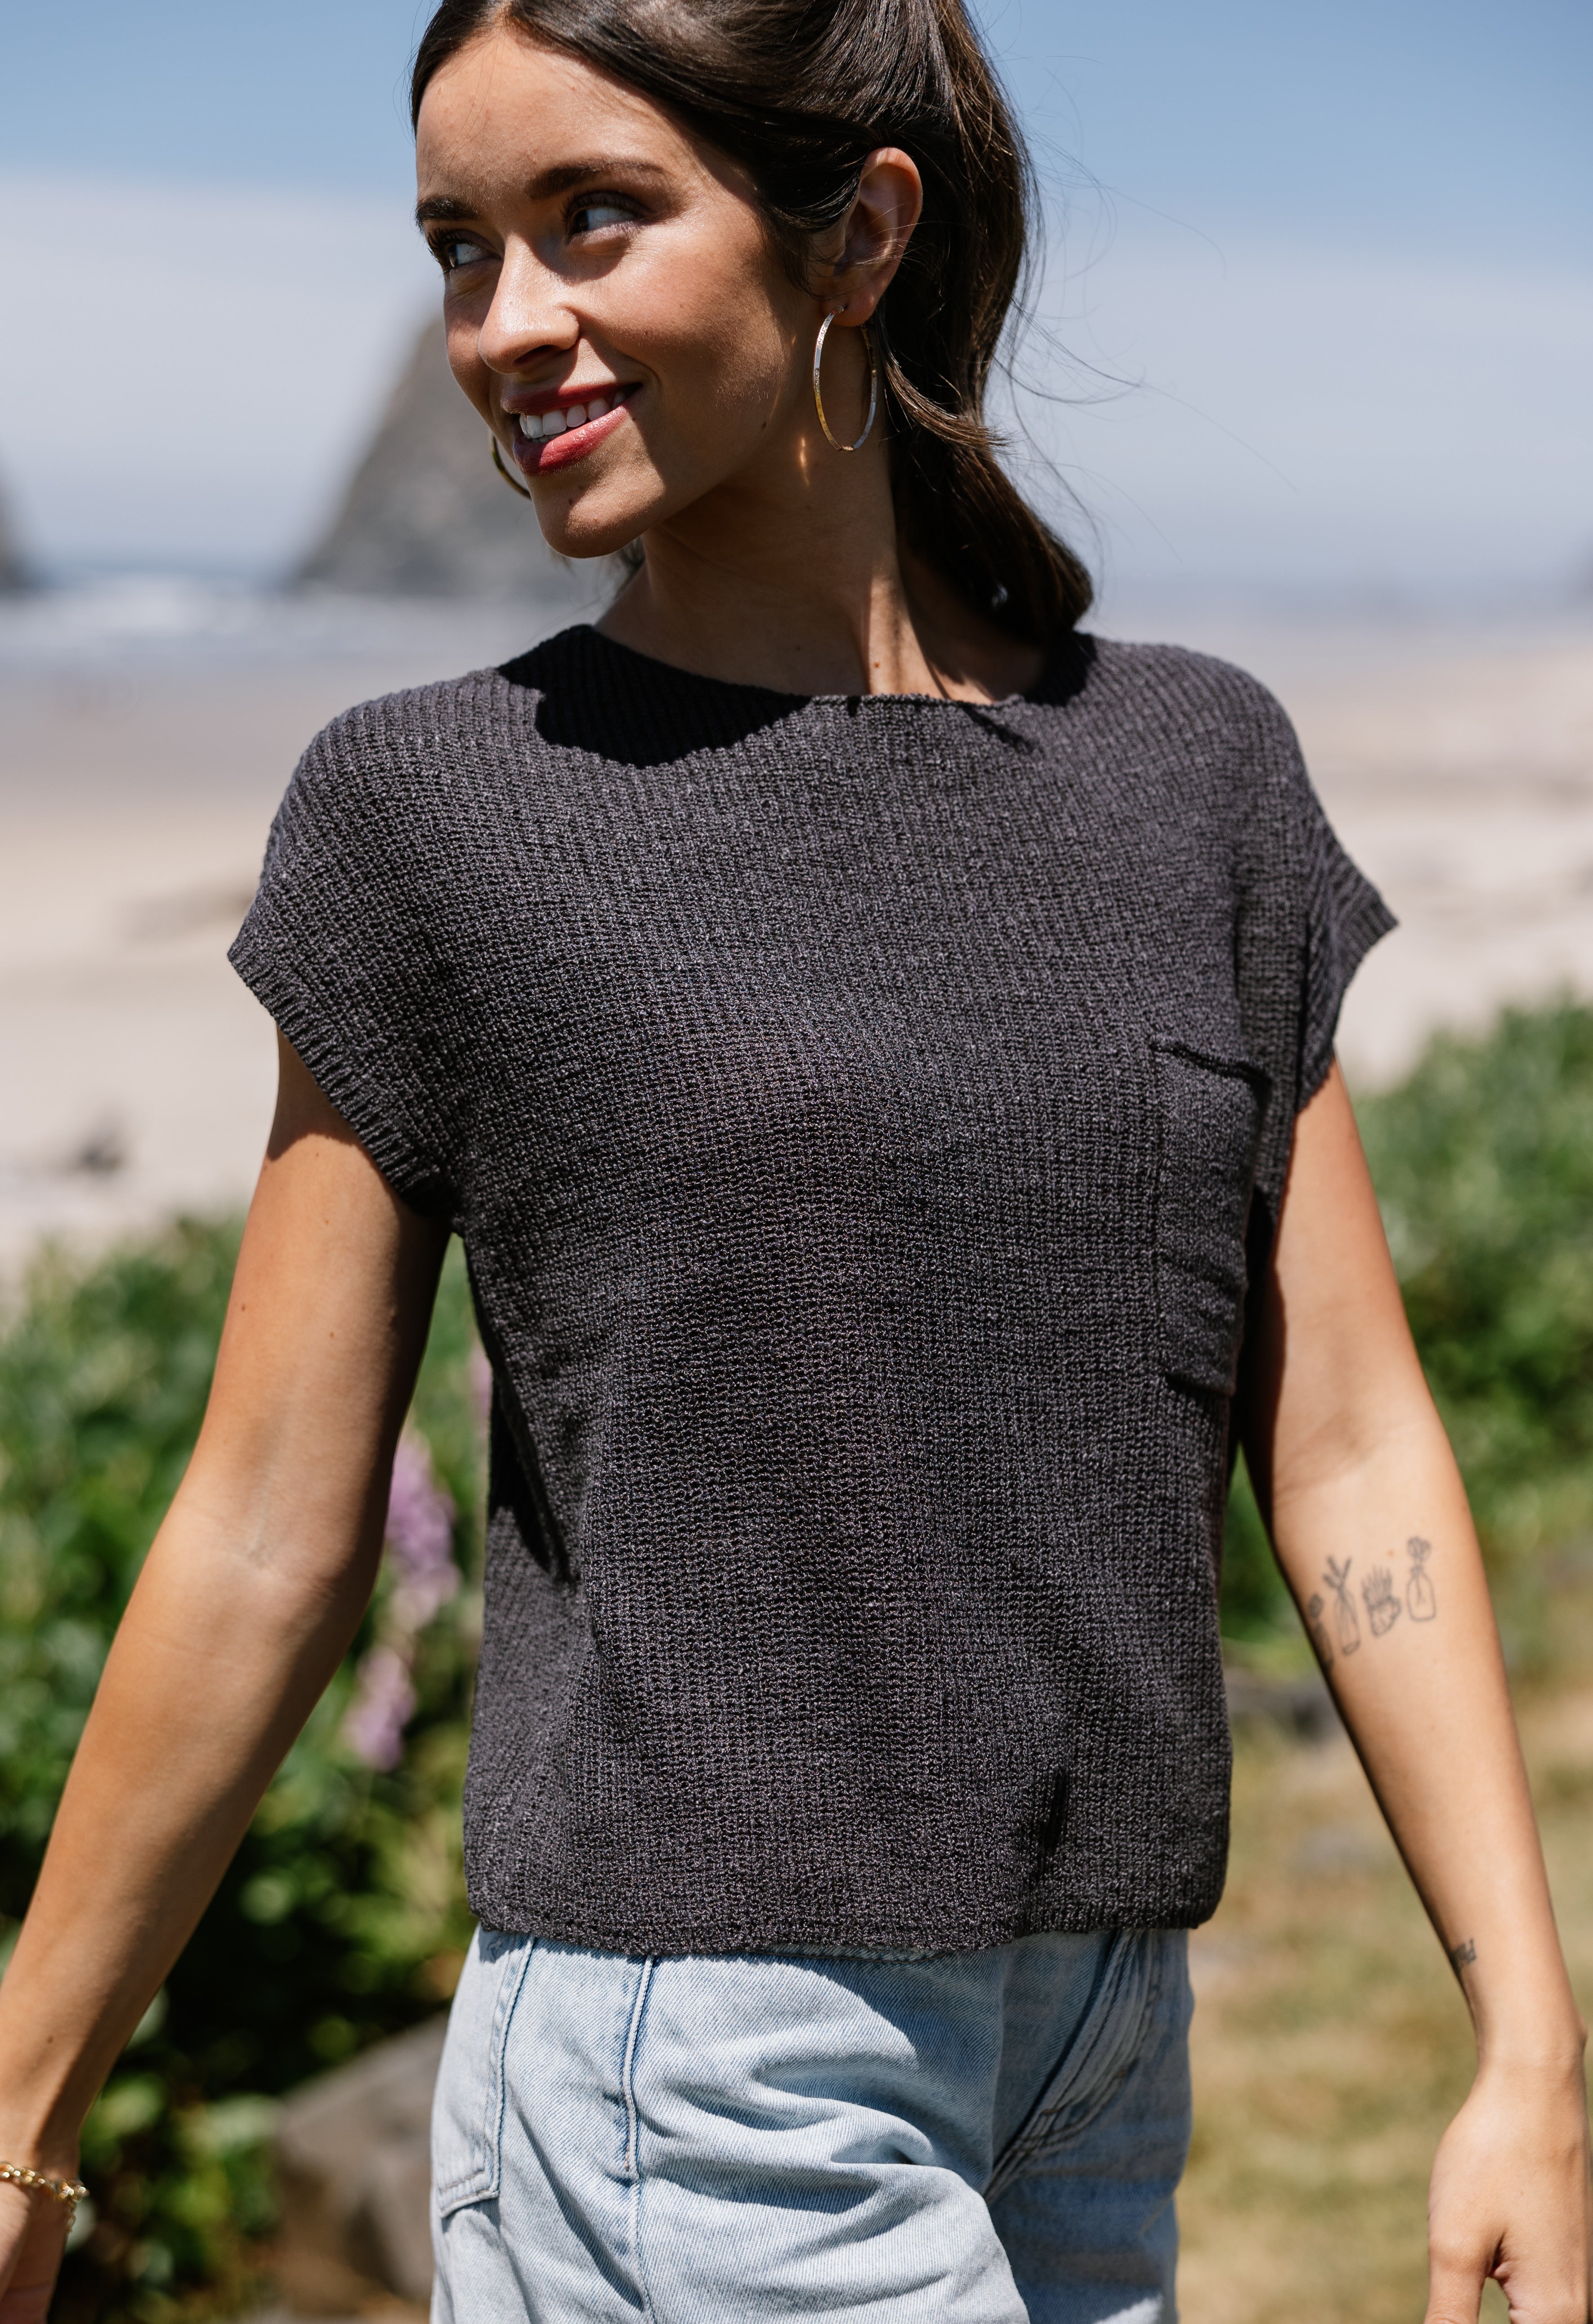 Sand Dollar Sweater - DARK CHARCOAL - willows clothing SWEATER